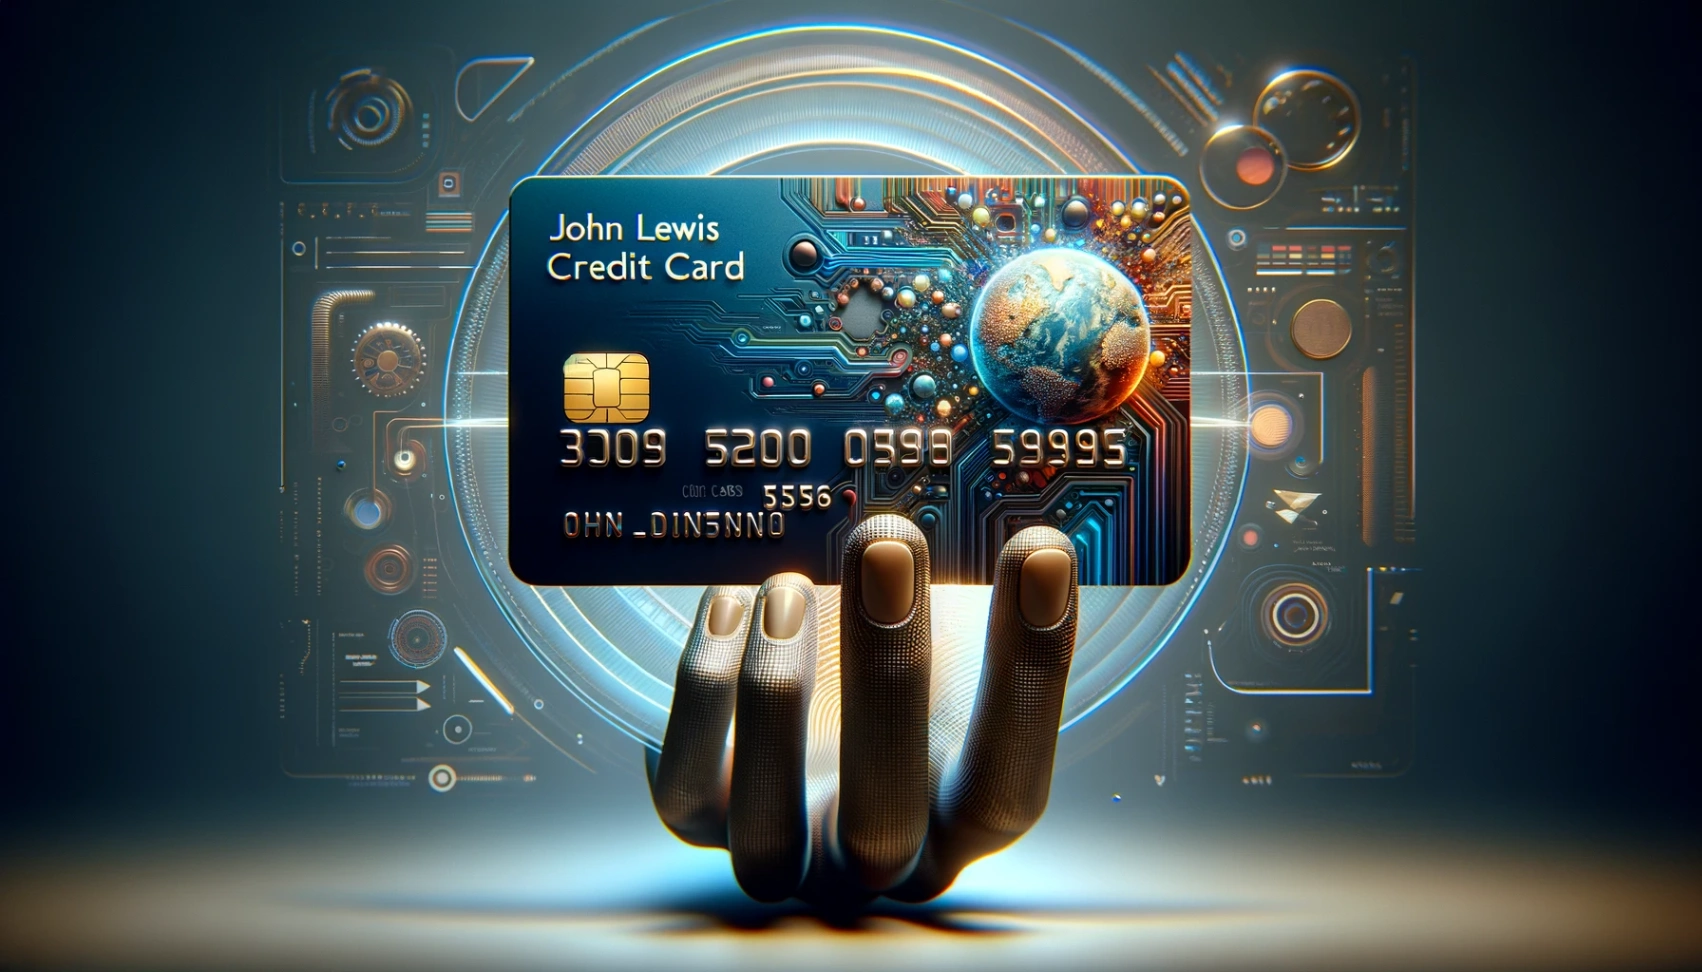 John Lewis Credit Card: Discover How to Apply